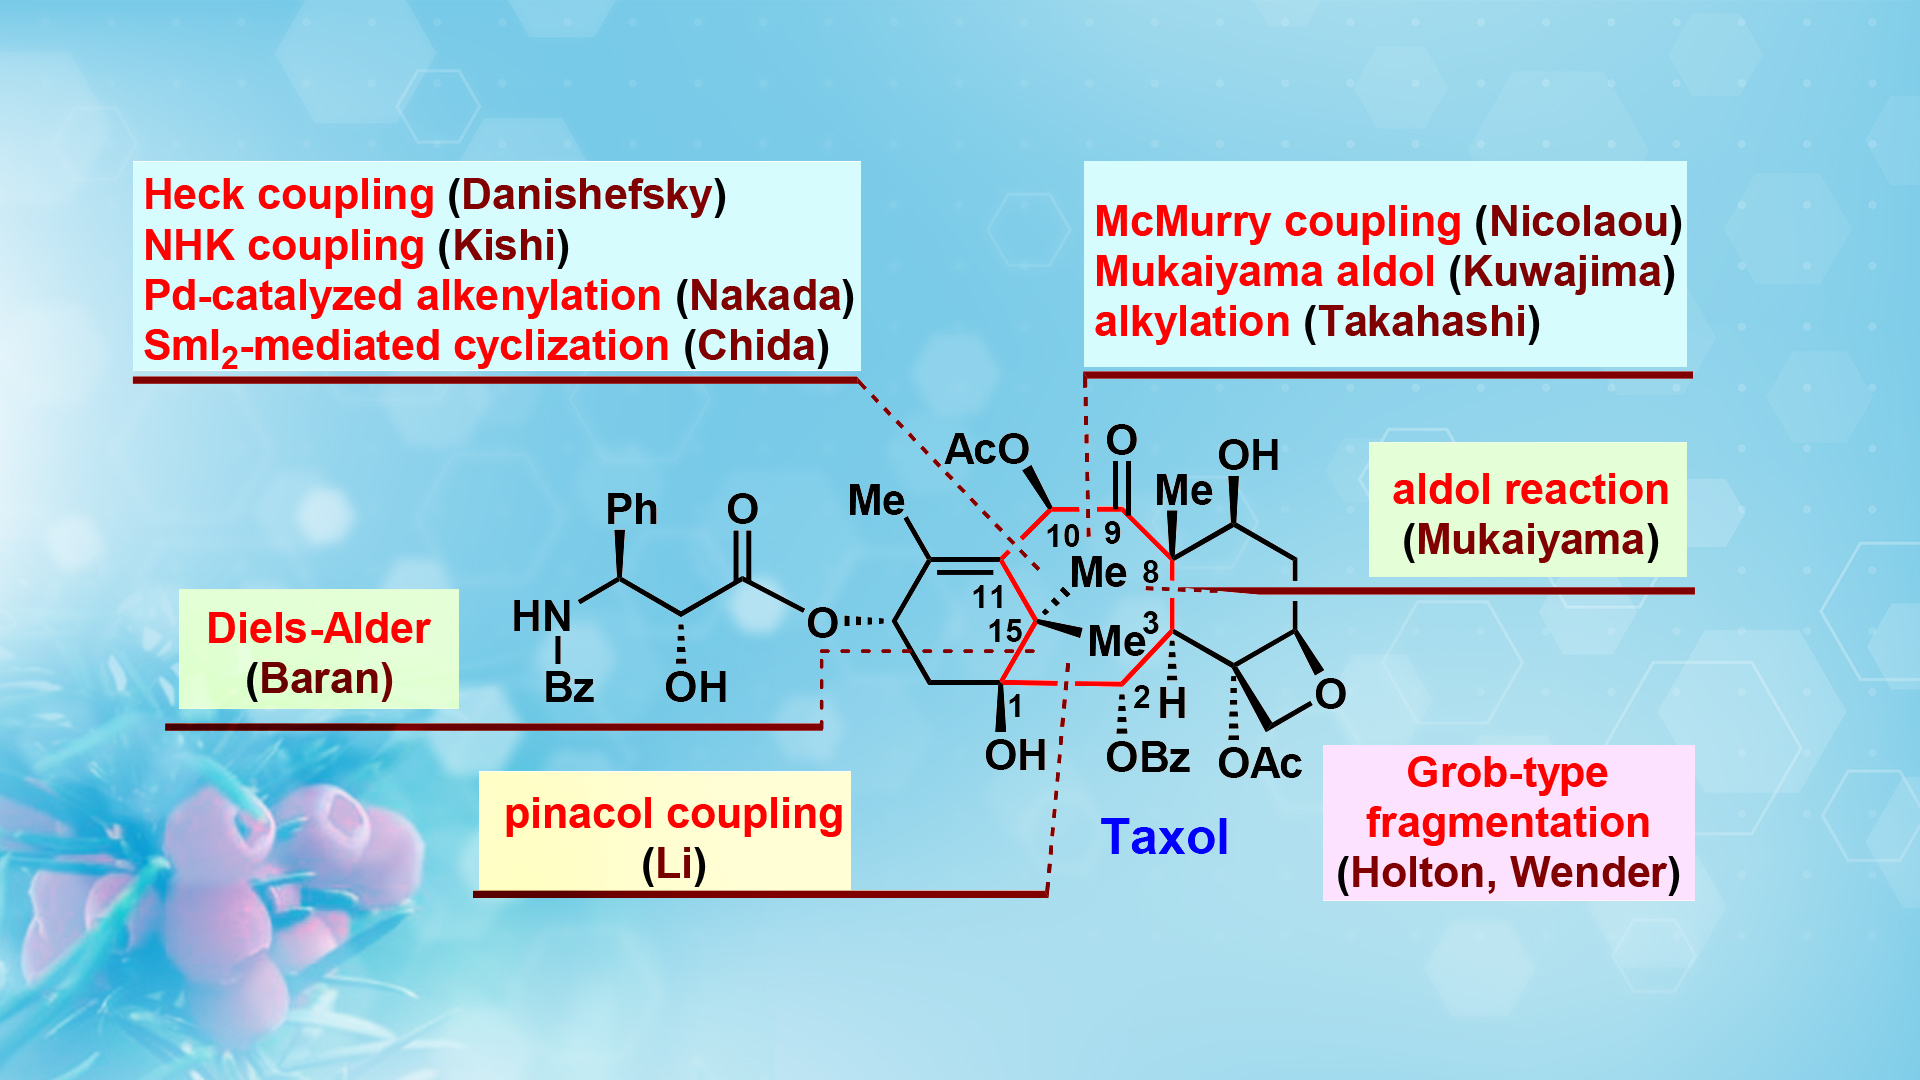 Researchers publish review on strategies and lessons learned from total synthesis of Taxol